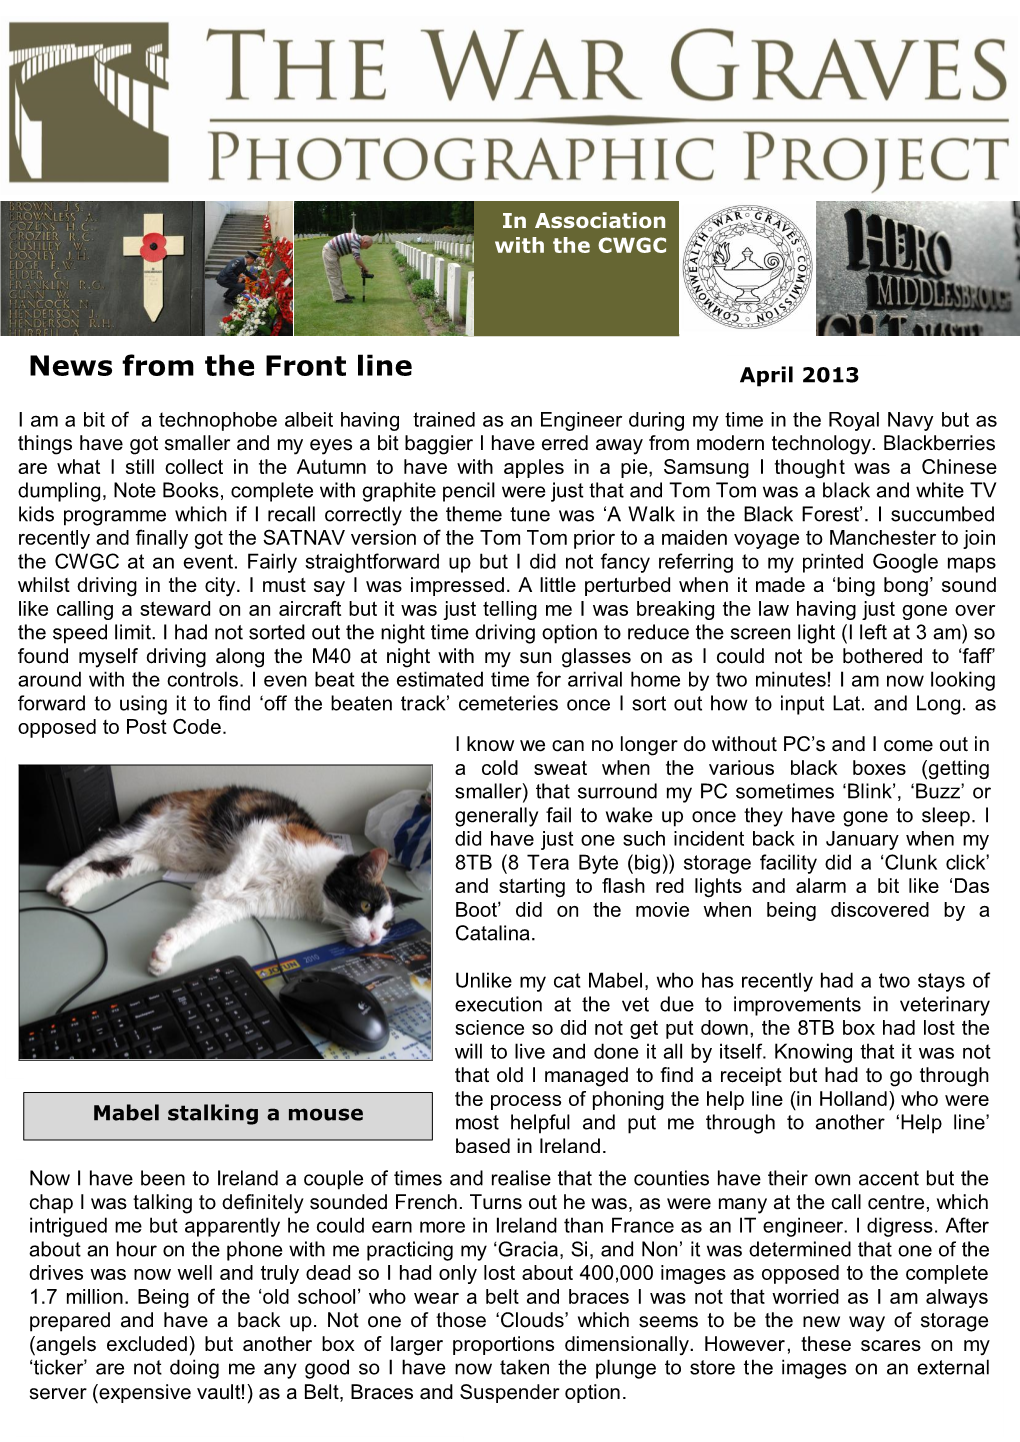 News from the Front Line April 2013